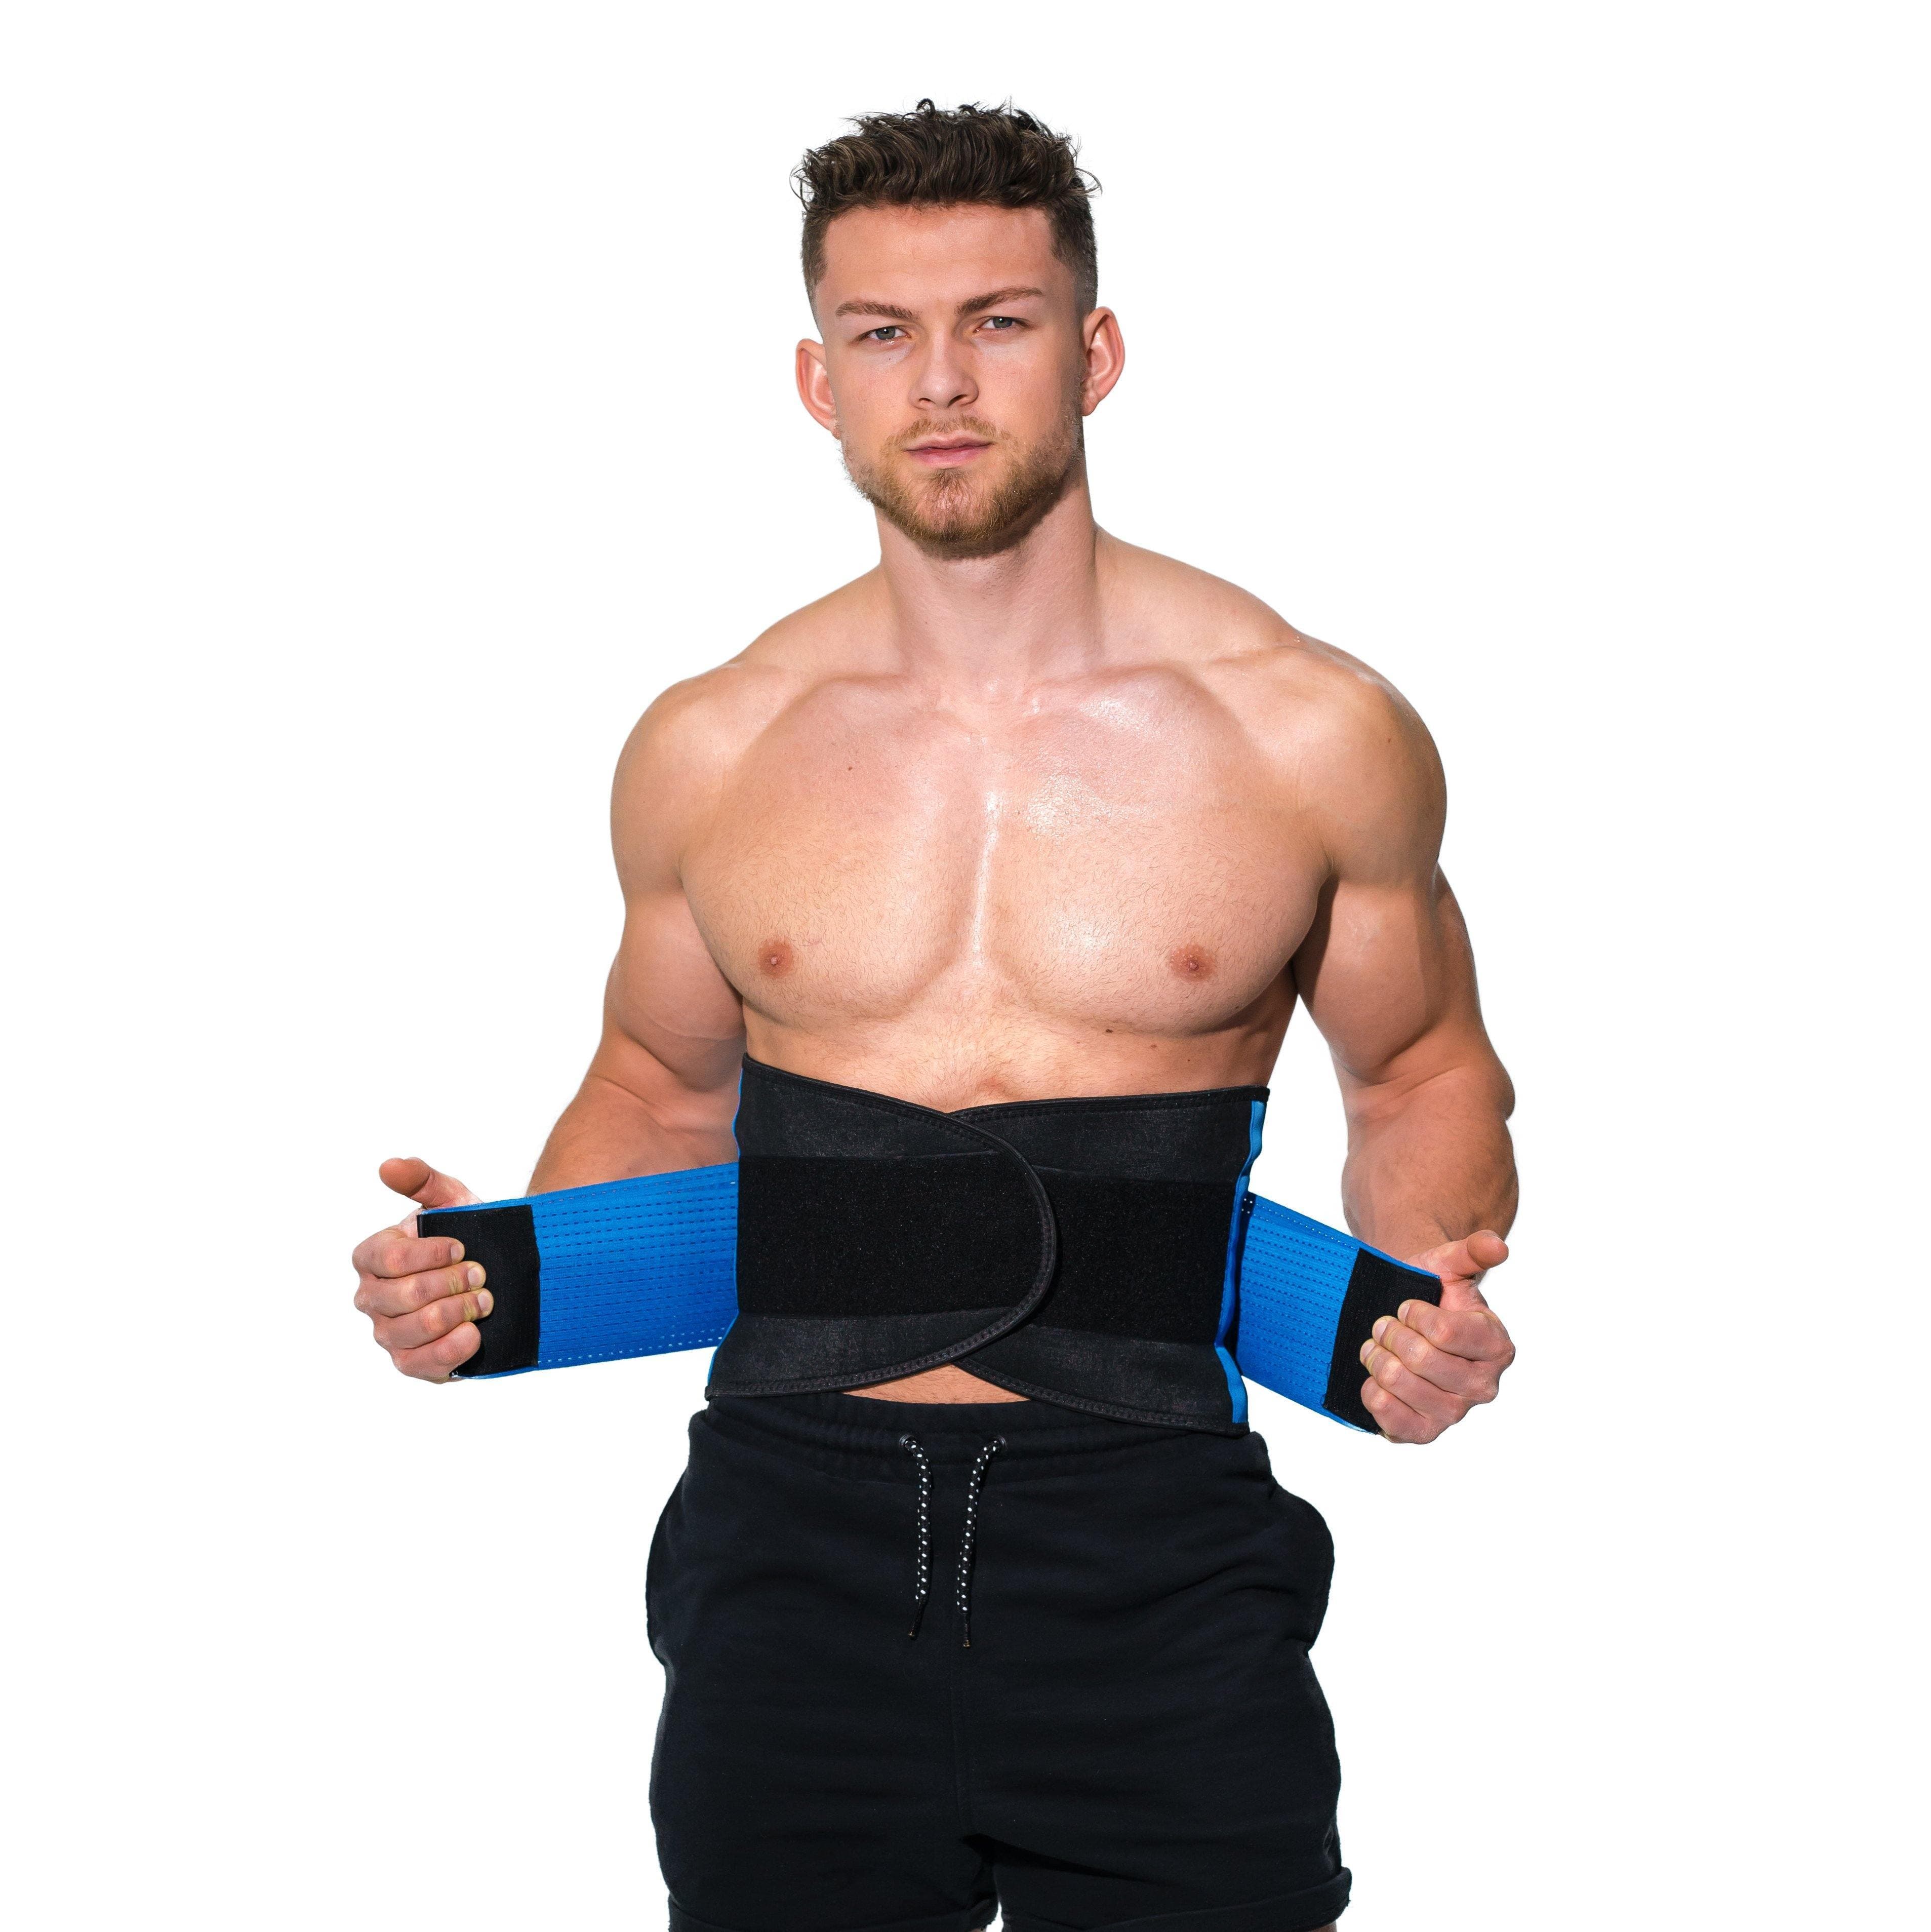 Man modeling the Redge Fit Waist Shaper Size Chart: Size Waistline (Inches) Width (Inches) XS 31.5 8.8 S 35.5 8.8 M 39.5 8.8 L 43.5 8.8 XL 47 8.8 XXL 51 8.8 Available at https://www.getredge.com/products/redge-waist-shaper-sweat-belt